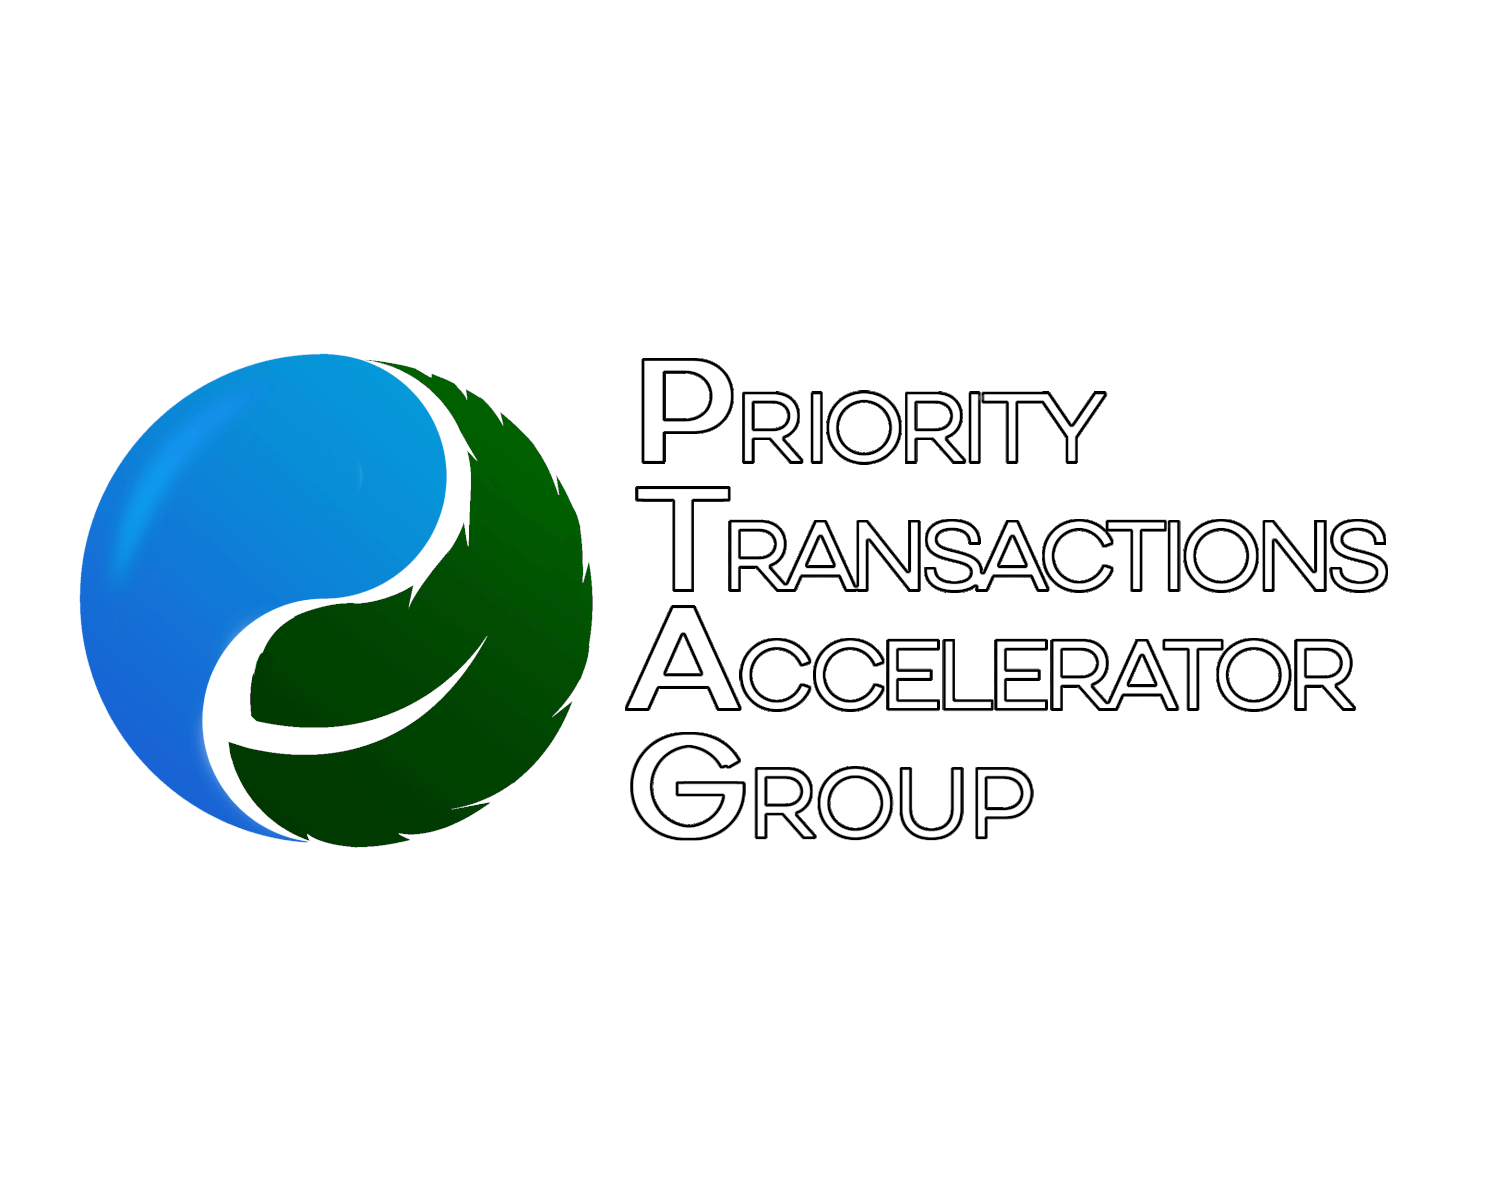 Priority Transactions Accelerator Group, Inc.